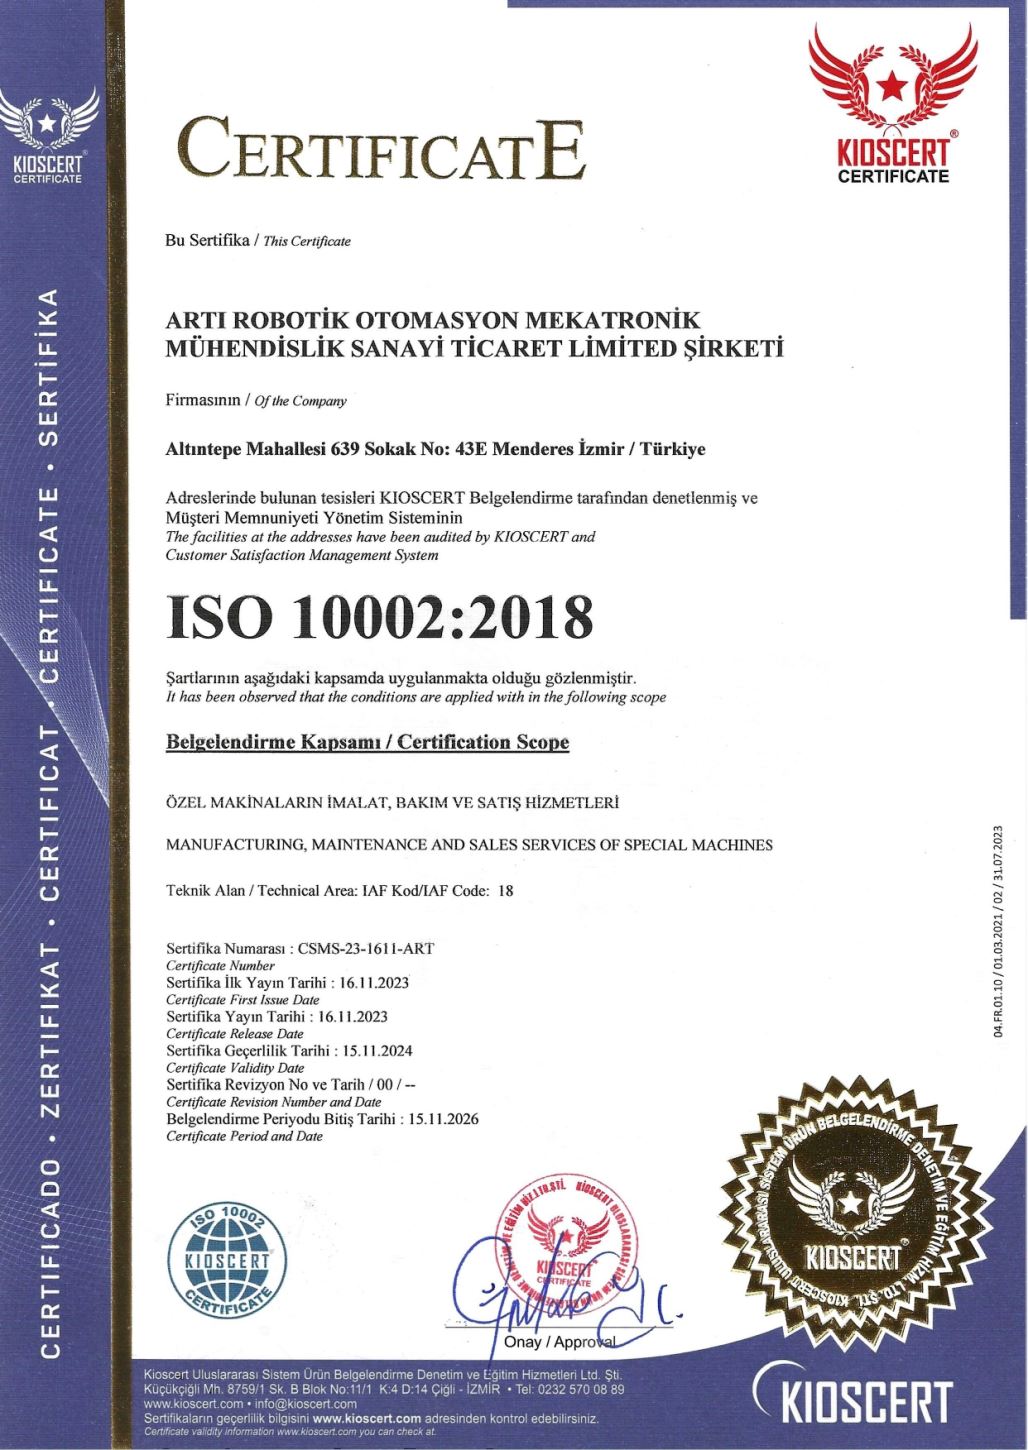 ISO 10002:2015